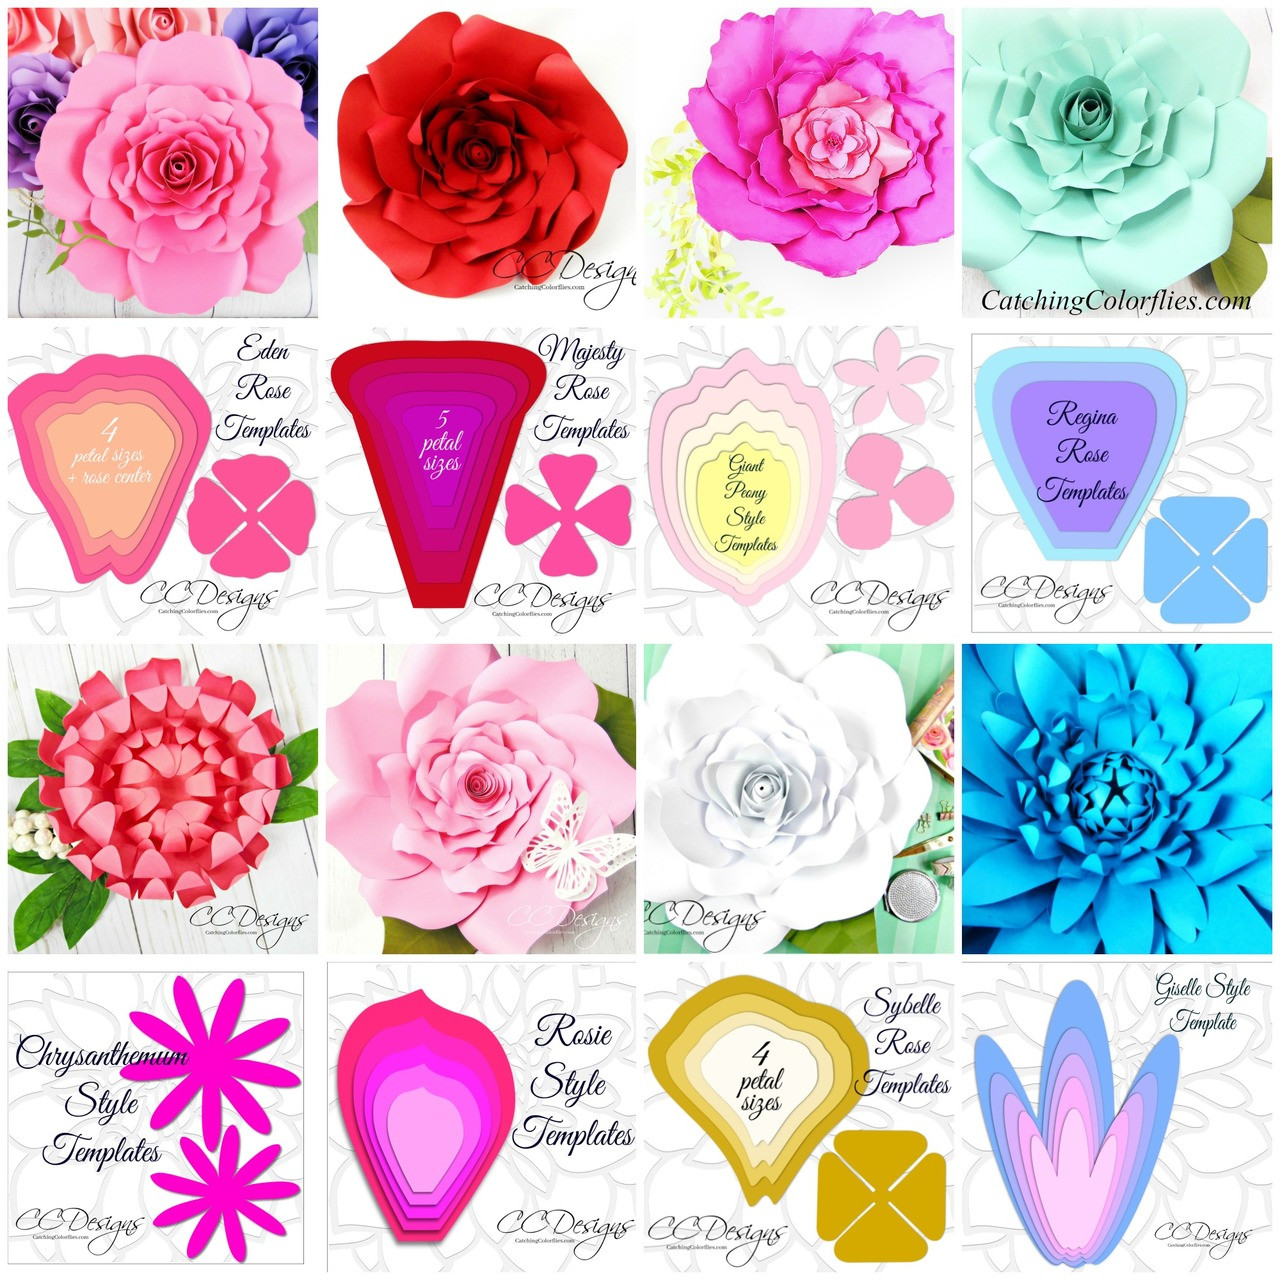 Download Giant Flower Template Set of 16 Flower Templates, plus ...